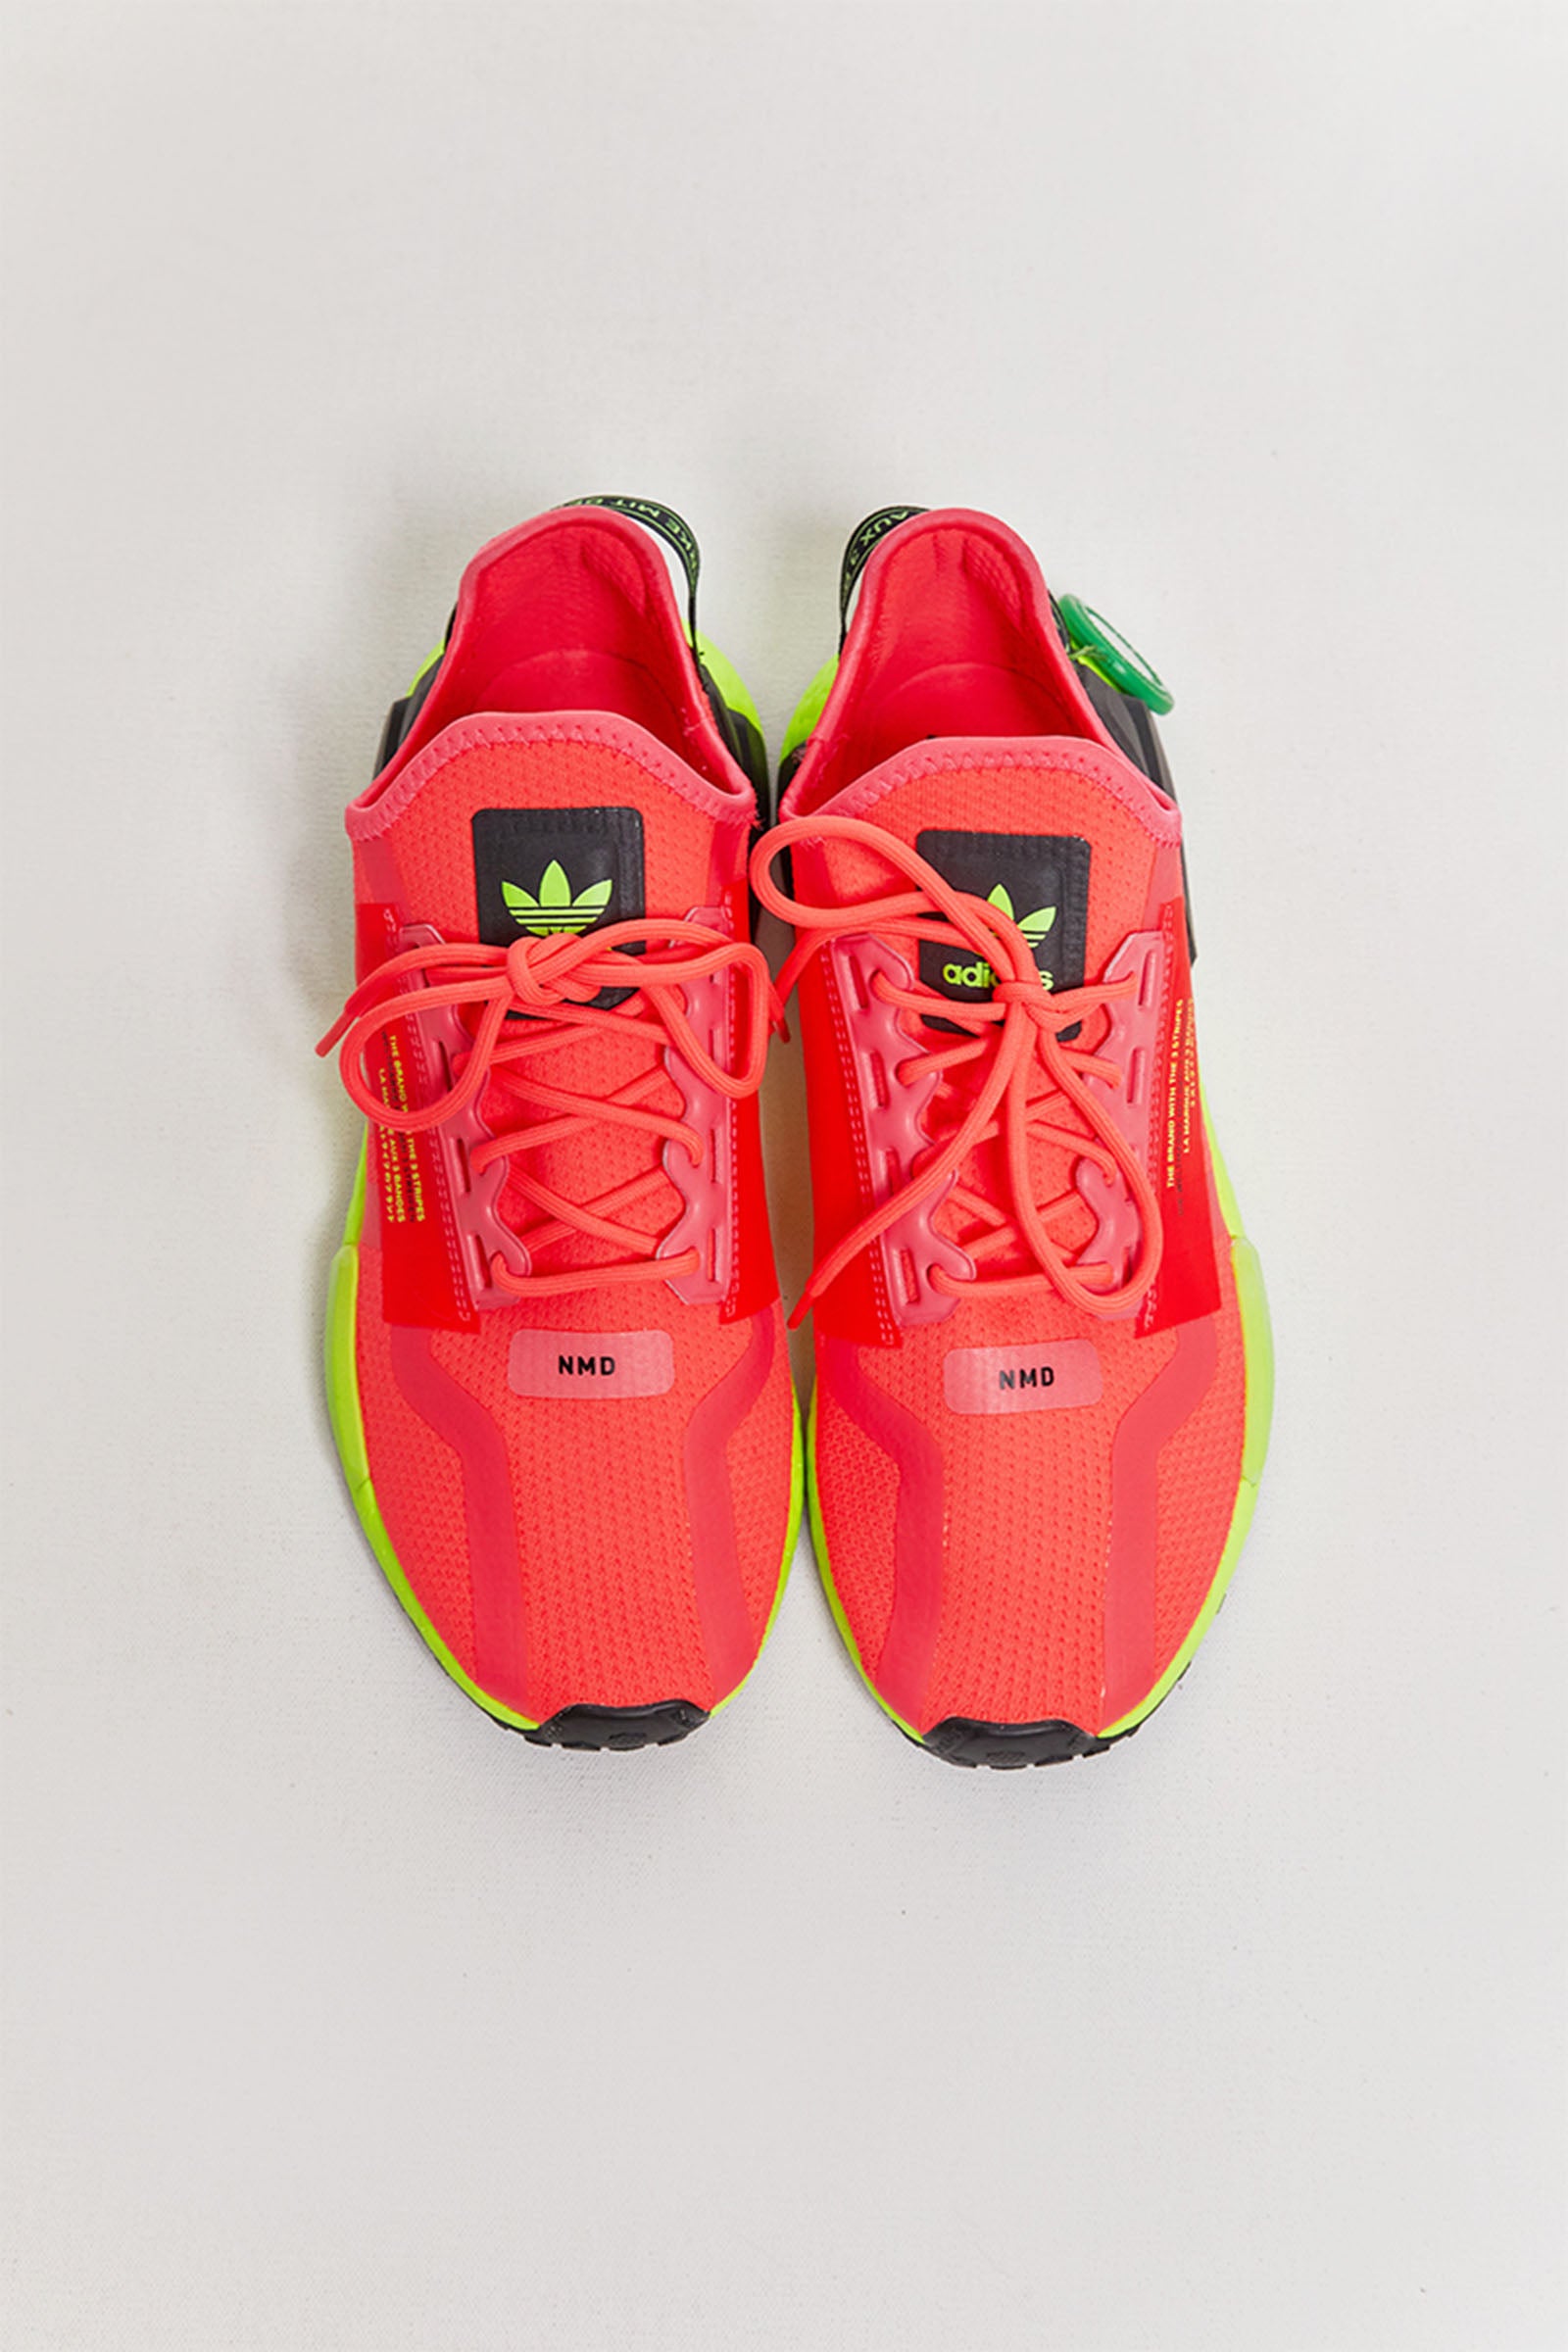 byfreer re-luxed watermelon adidas sneakers.